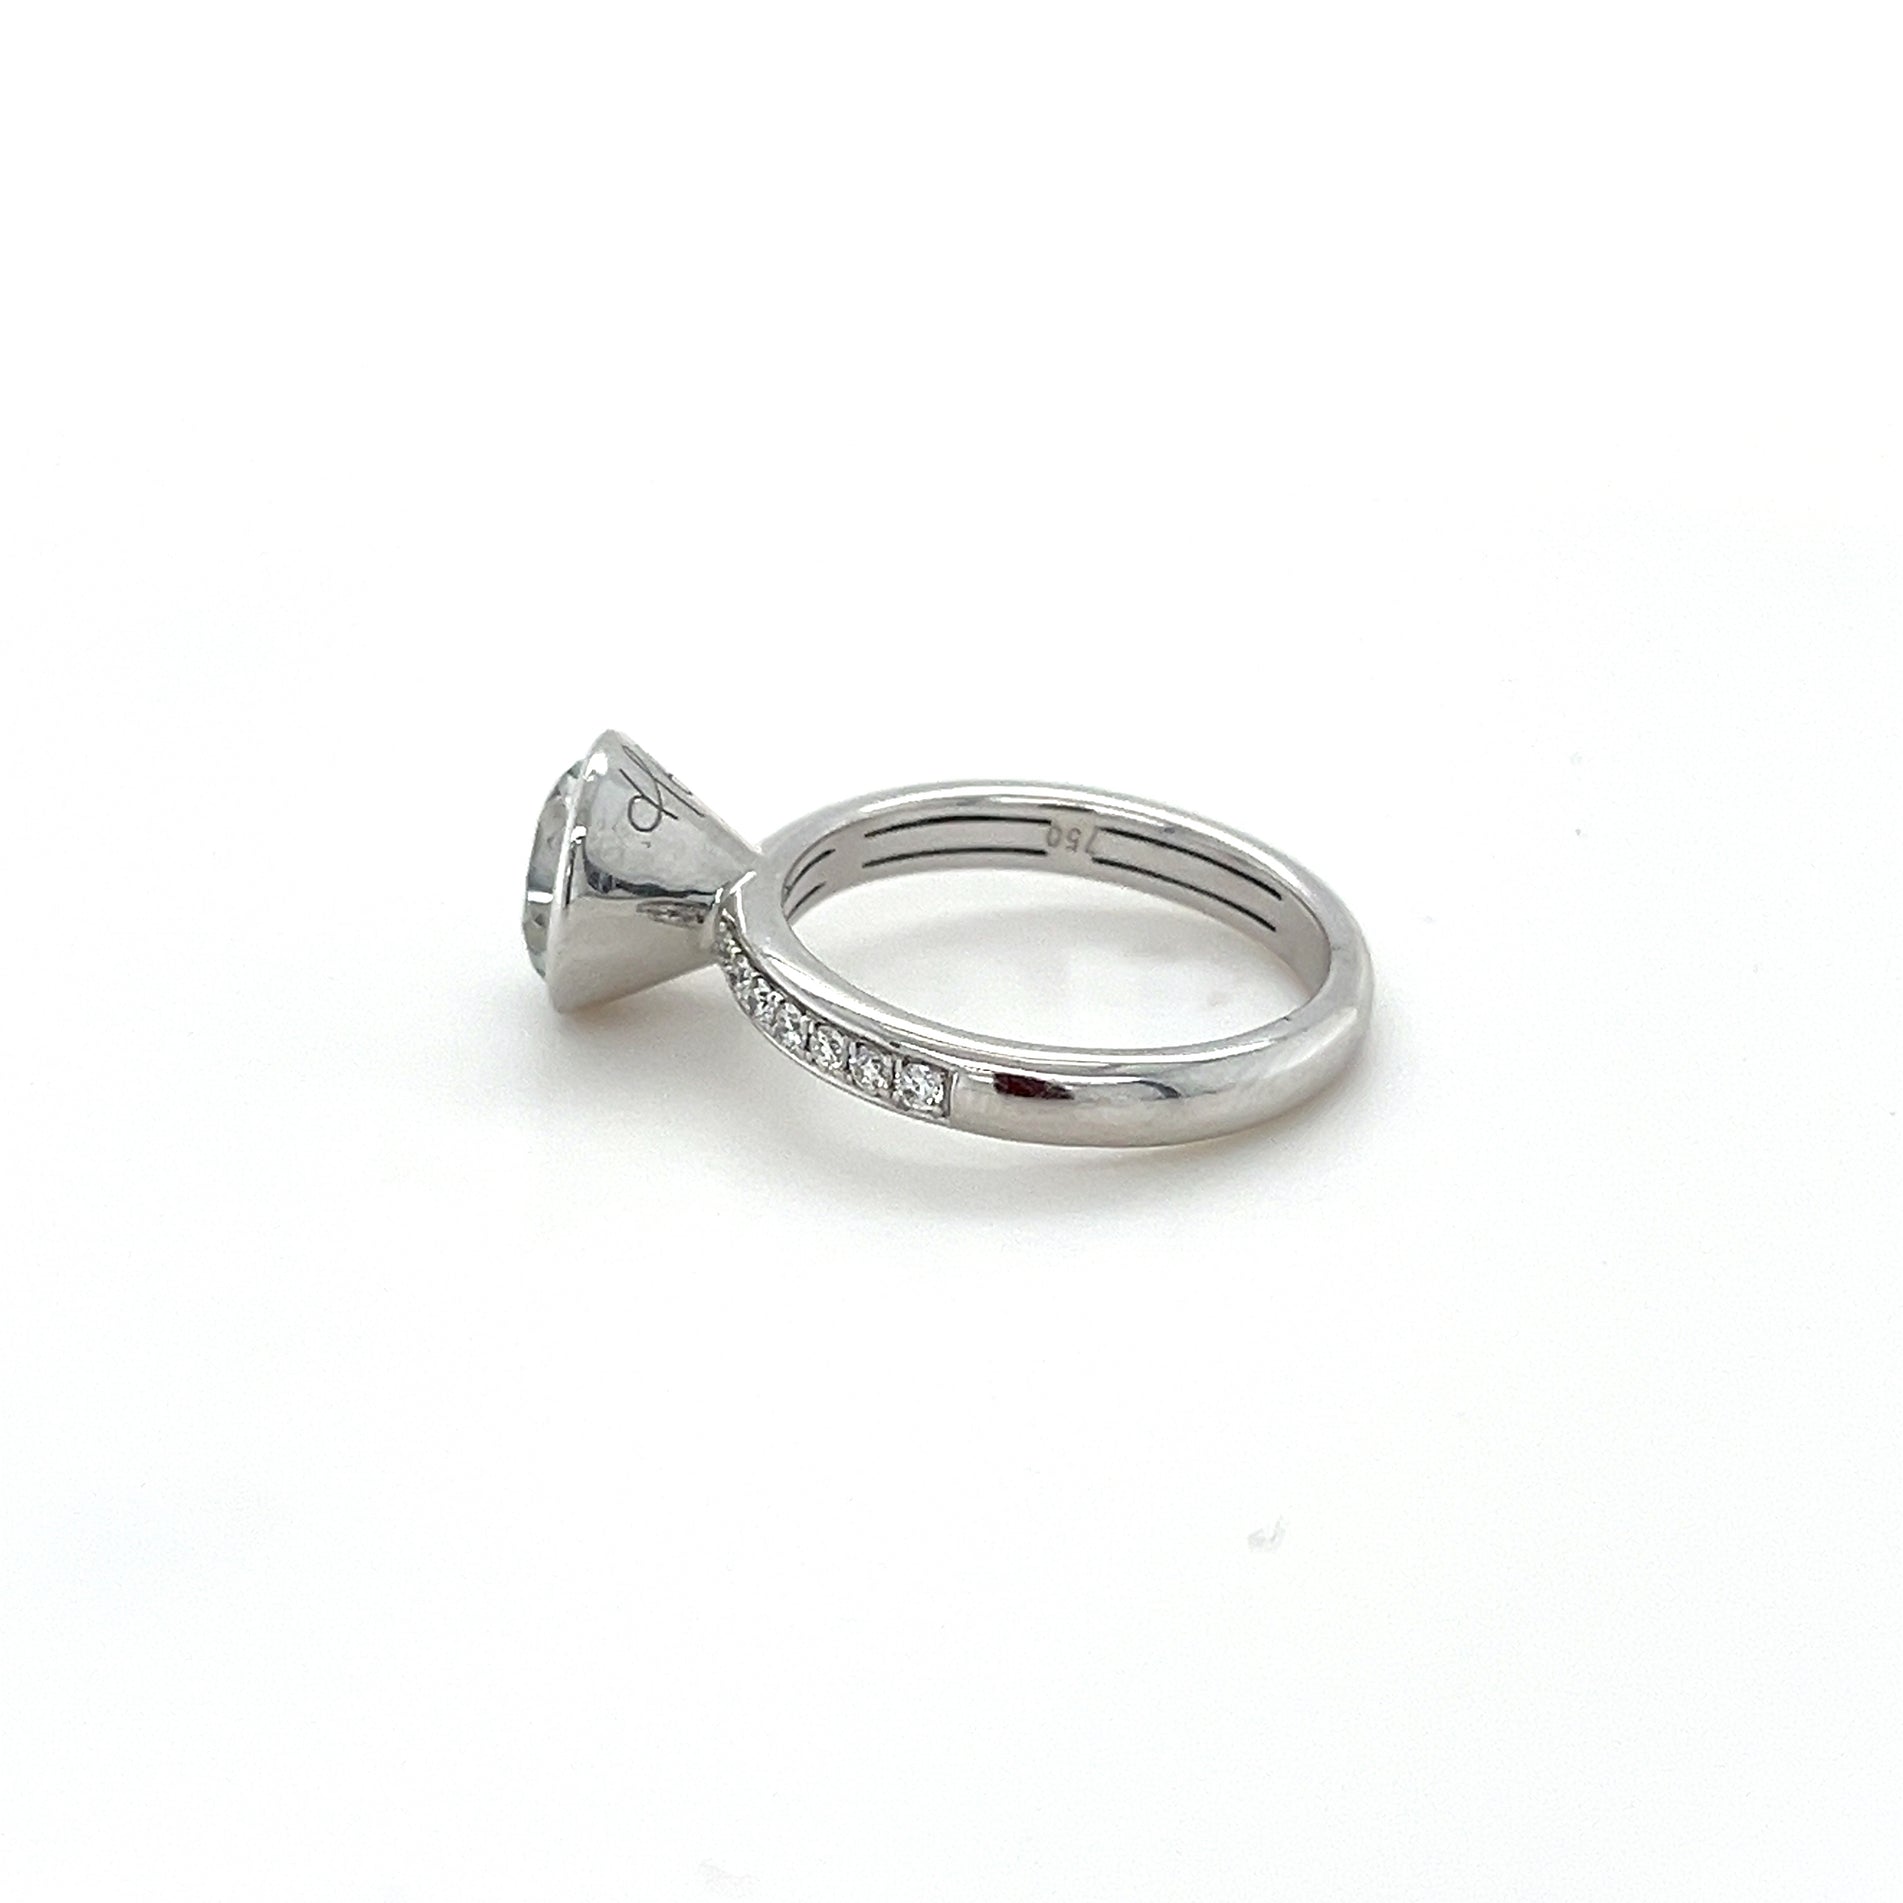 Funghetti Ring in 18k White Gold with White Topaz and Diamonds - Orsini Jewellers NZ